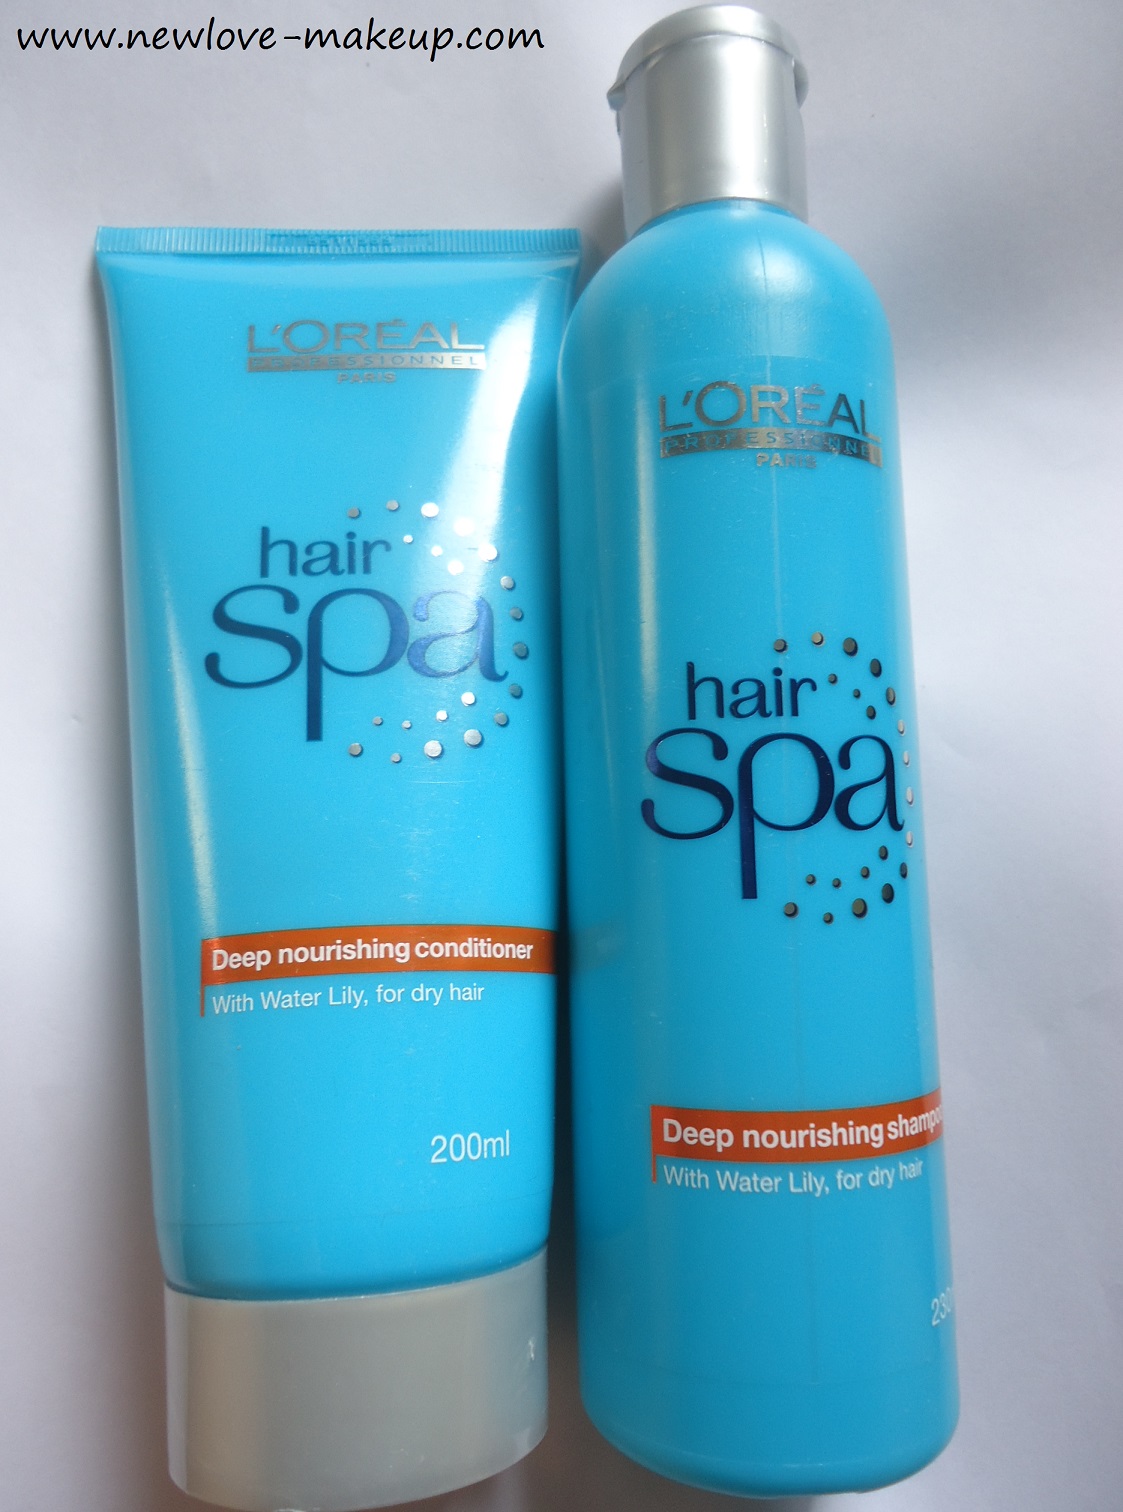 L'Oreal Professionnel Hair Spa Deep Nourishing Shampoo,Conditioner Review New Love -